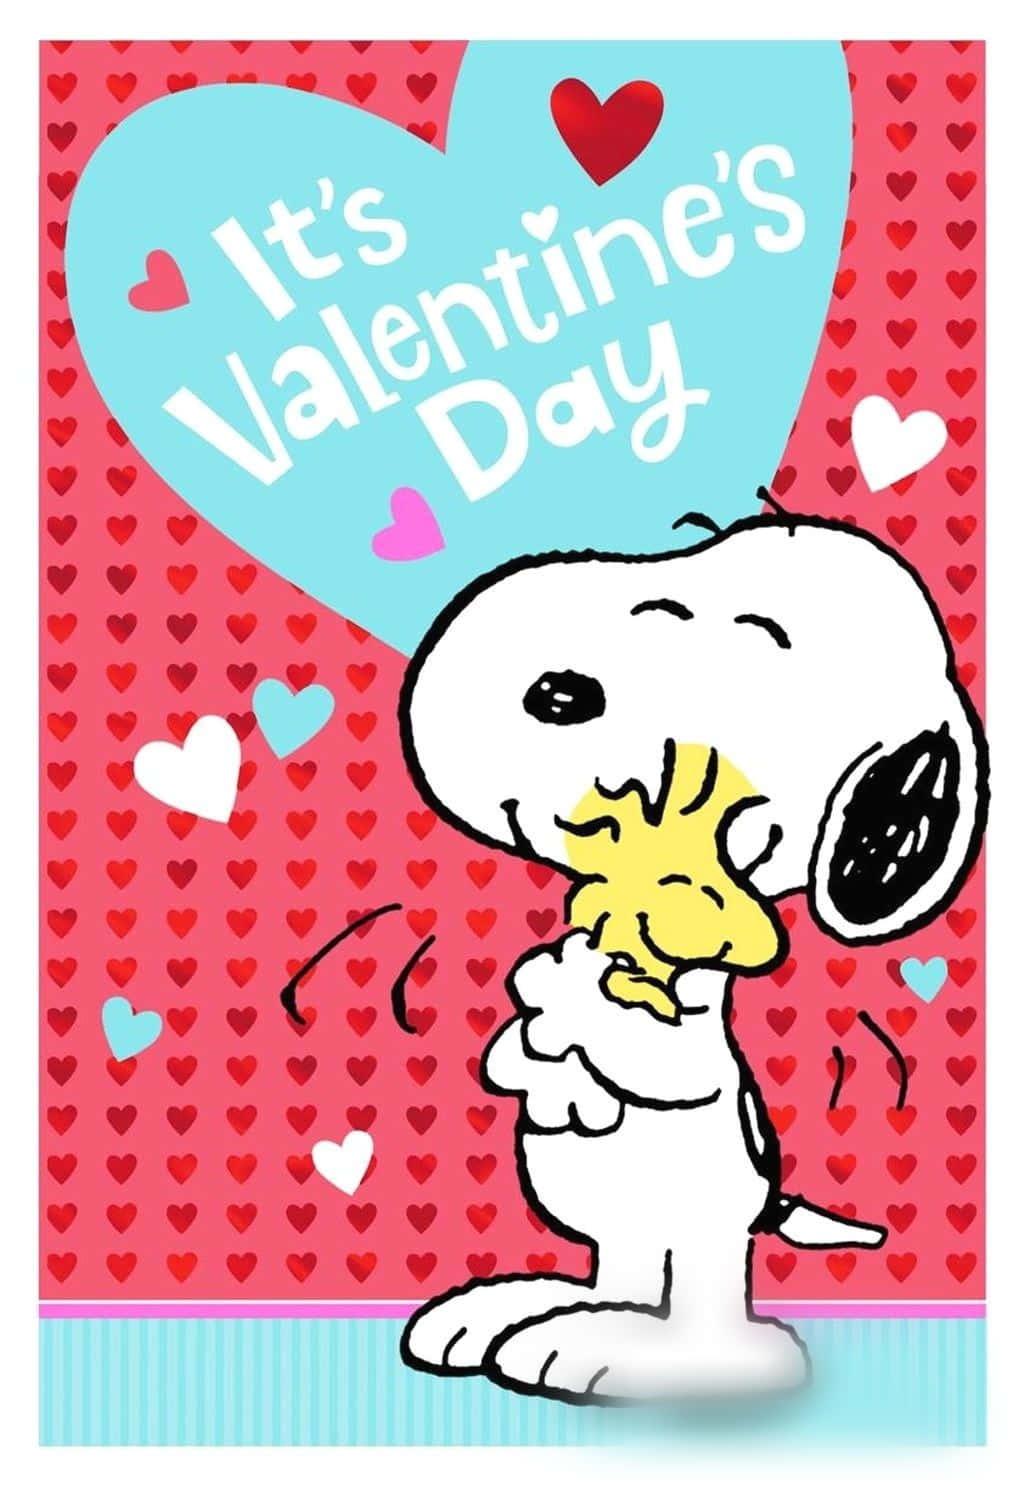 Snoopy And His Dog Are Holding A Heart Shaped Valentine's Day Card Background